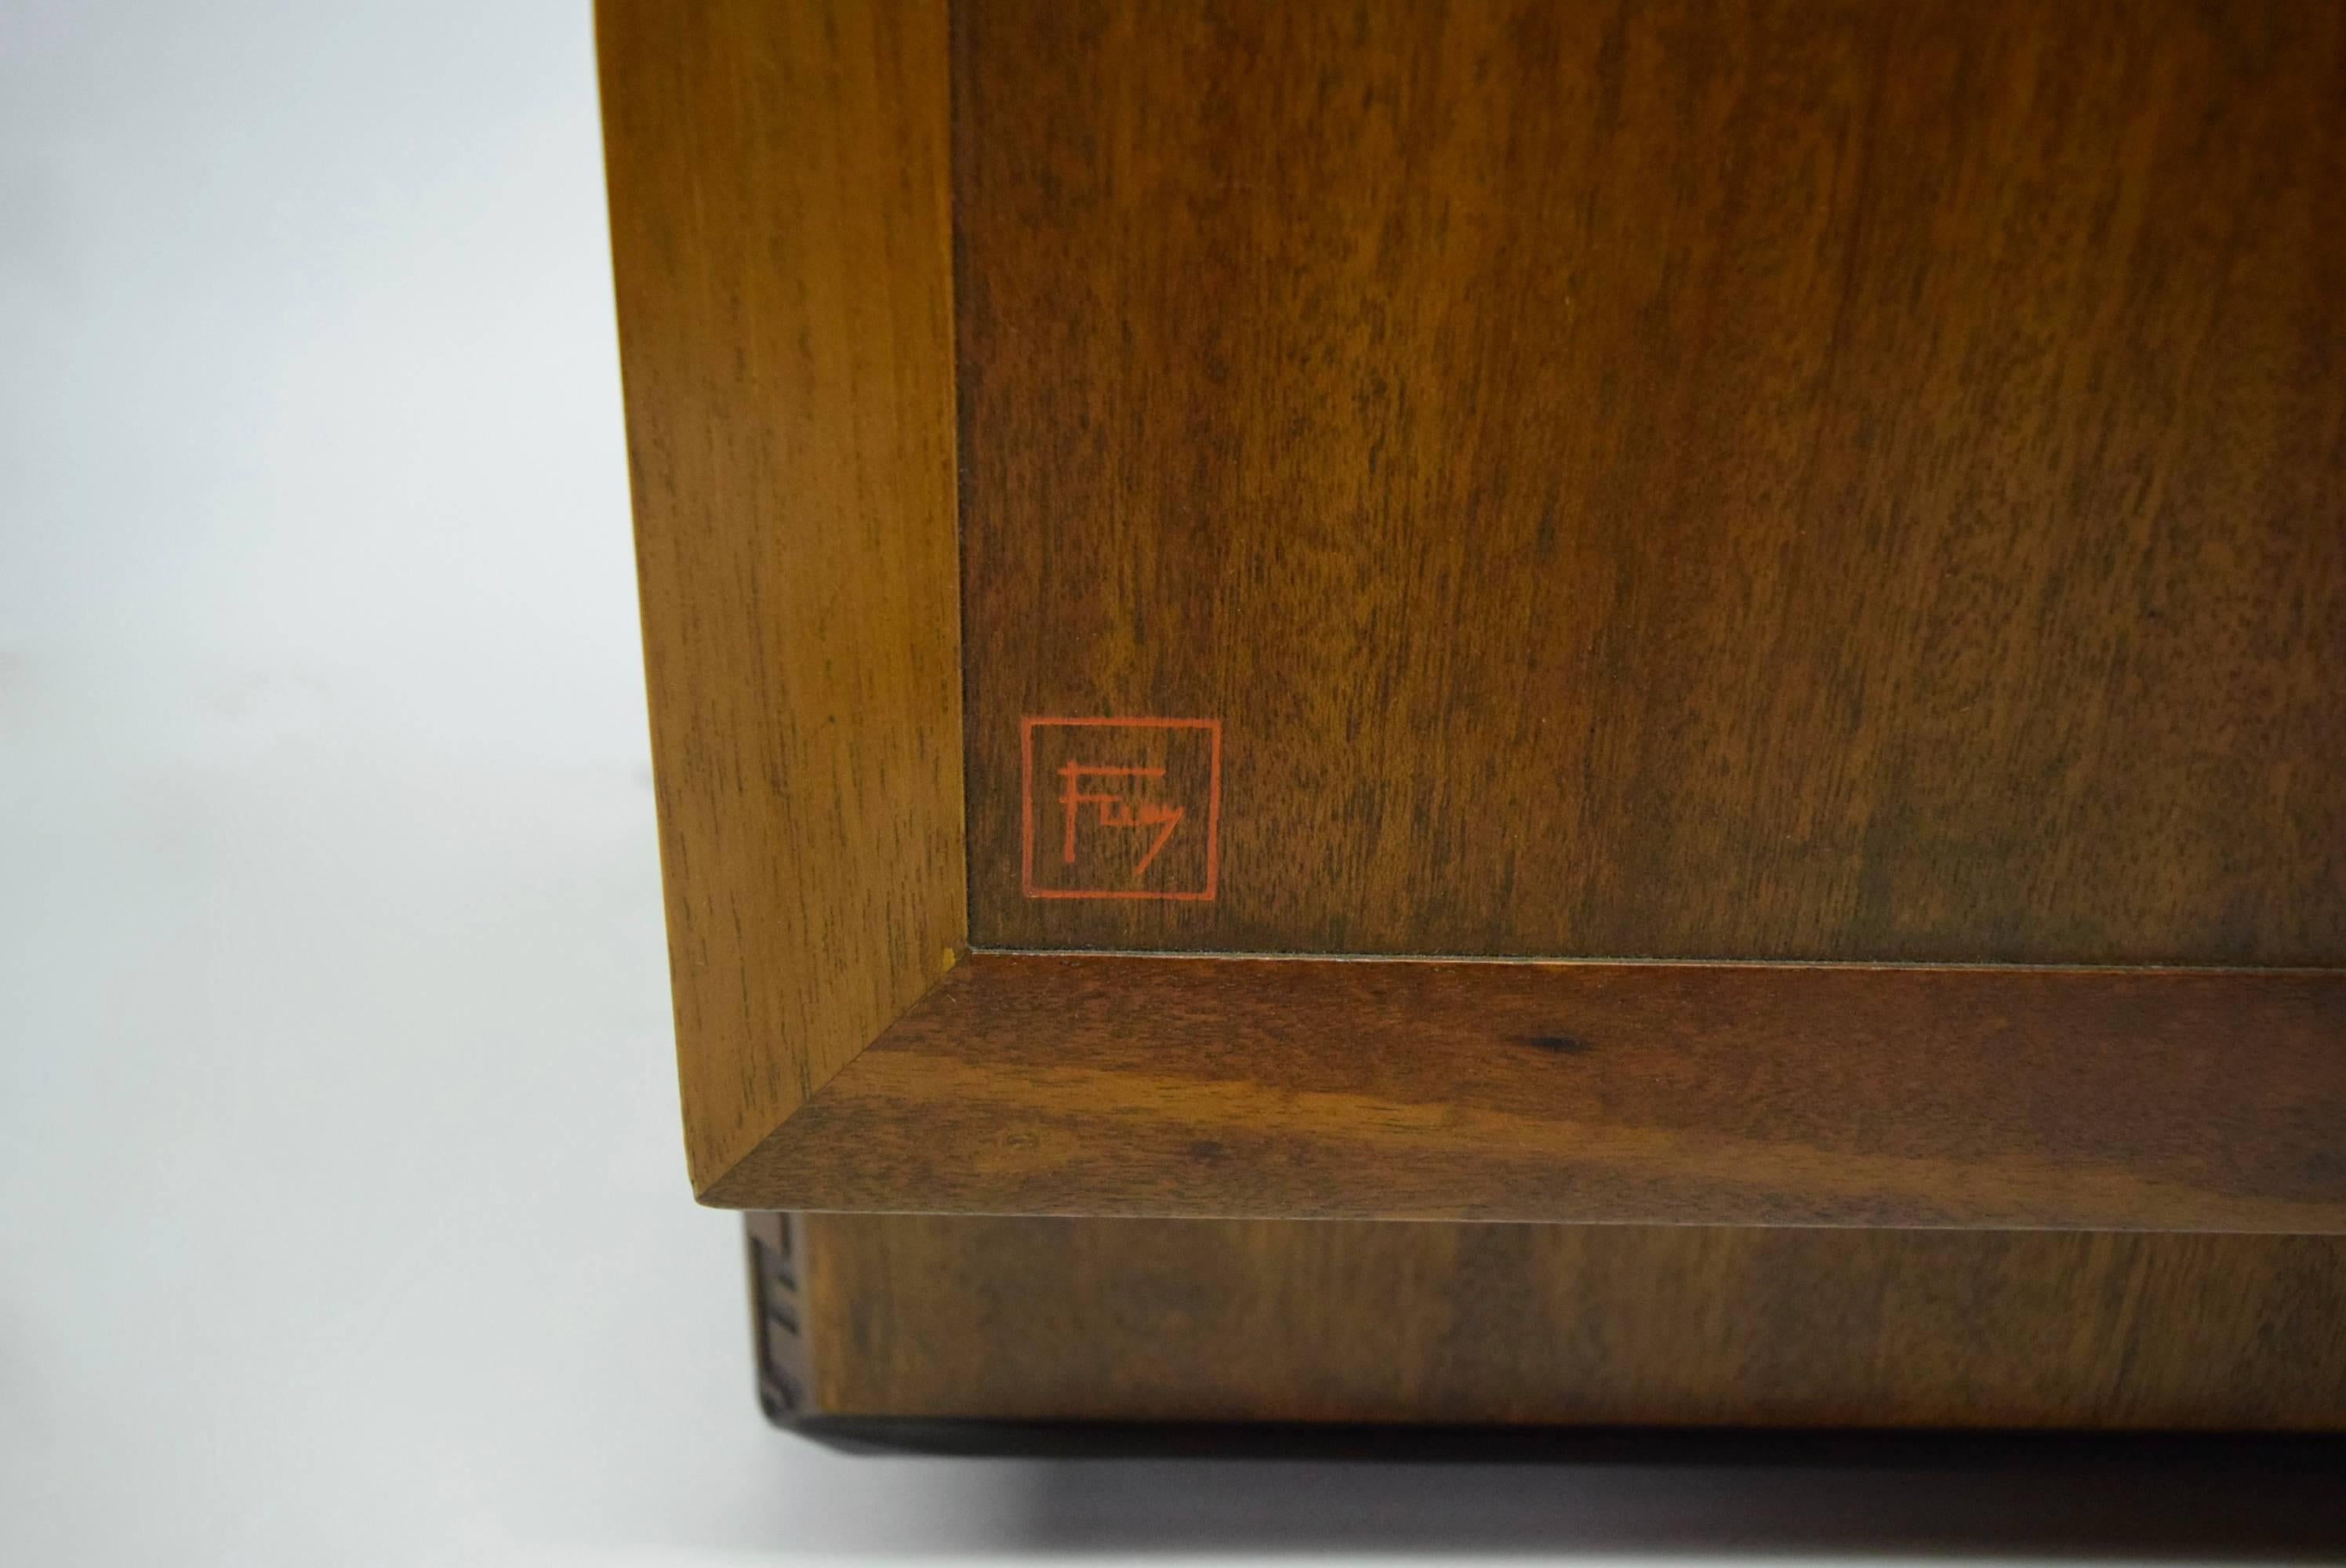 Mid-20th Century Pair of Side Tables by Frank Lloyd Wright for Heritage-Henredon, 1955-1956, USA